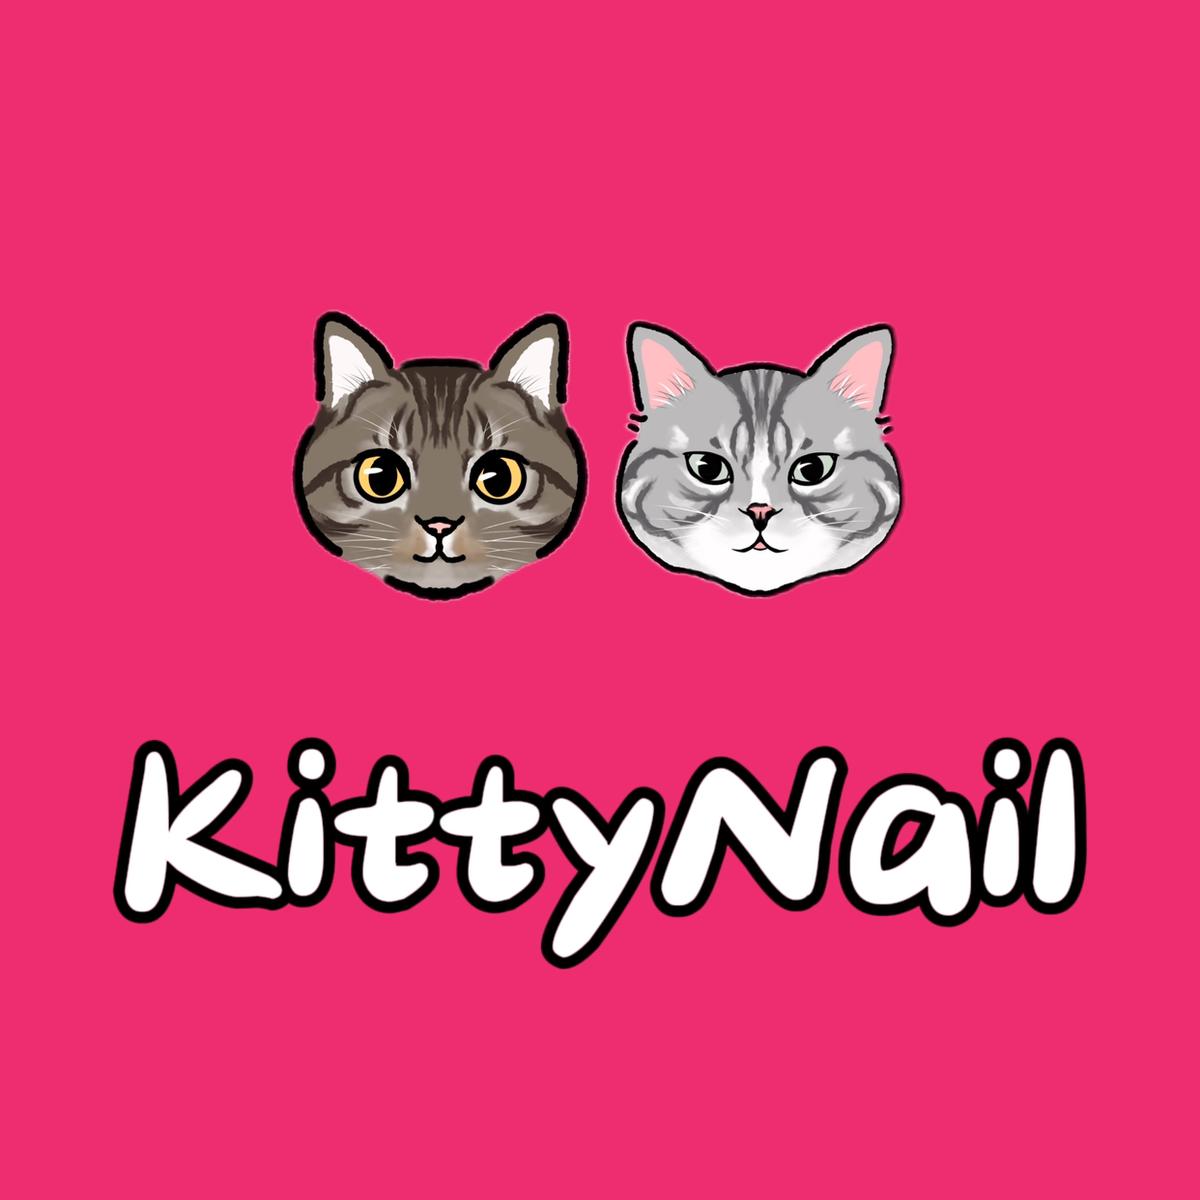 KittyNail's images